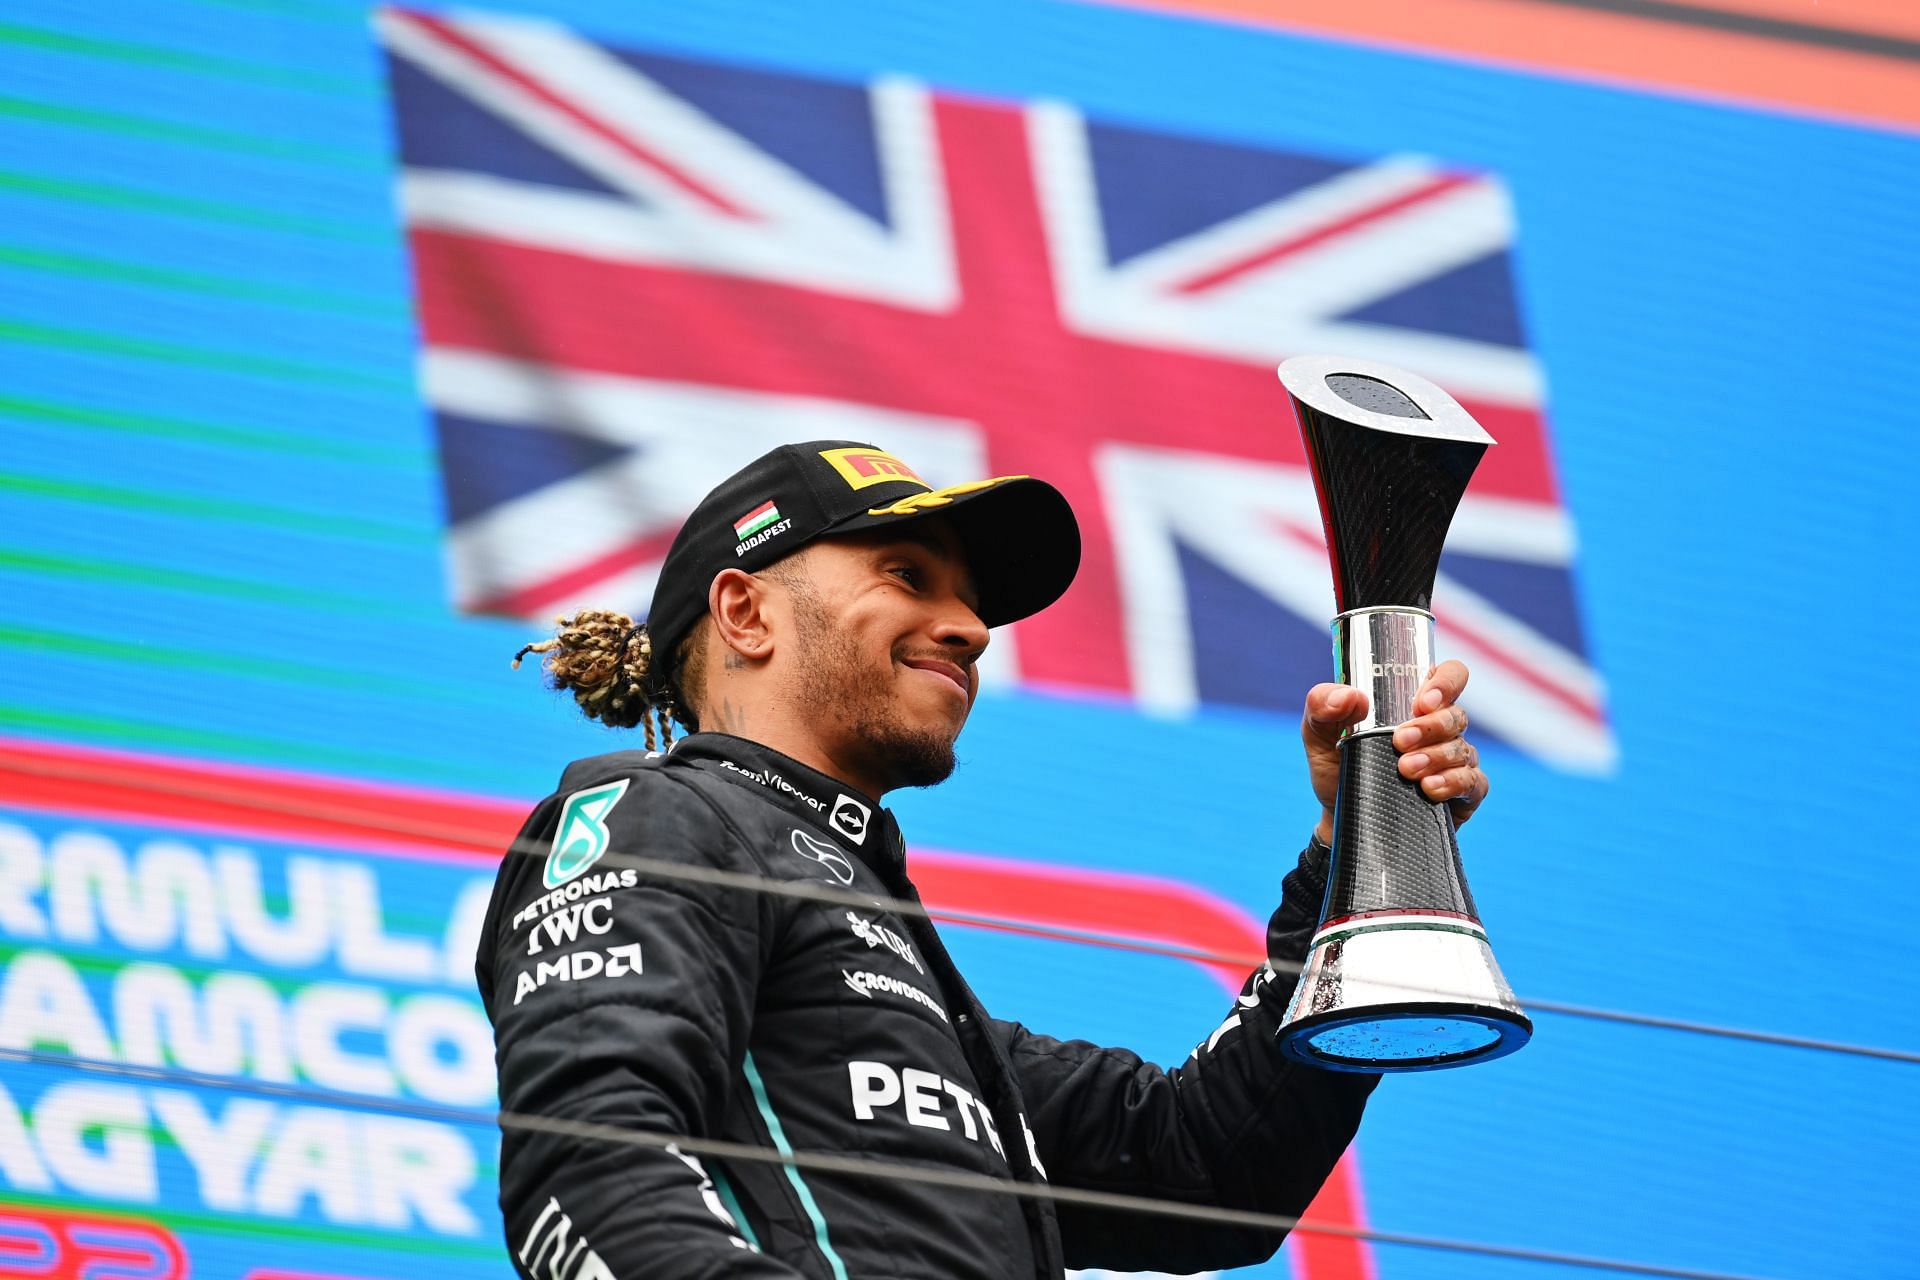 Mercedes driver Lewis Hamilton celebrates on the podium after his P2 finish at the 2022 F1 Hungarian GP (Photo by Dan Mullan/Getty Images)